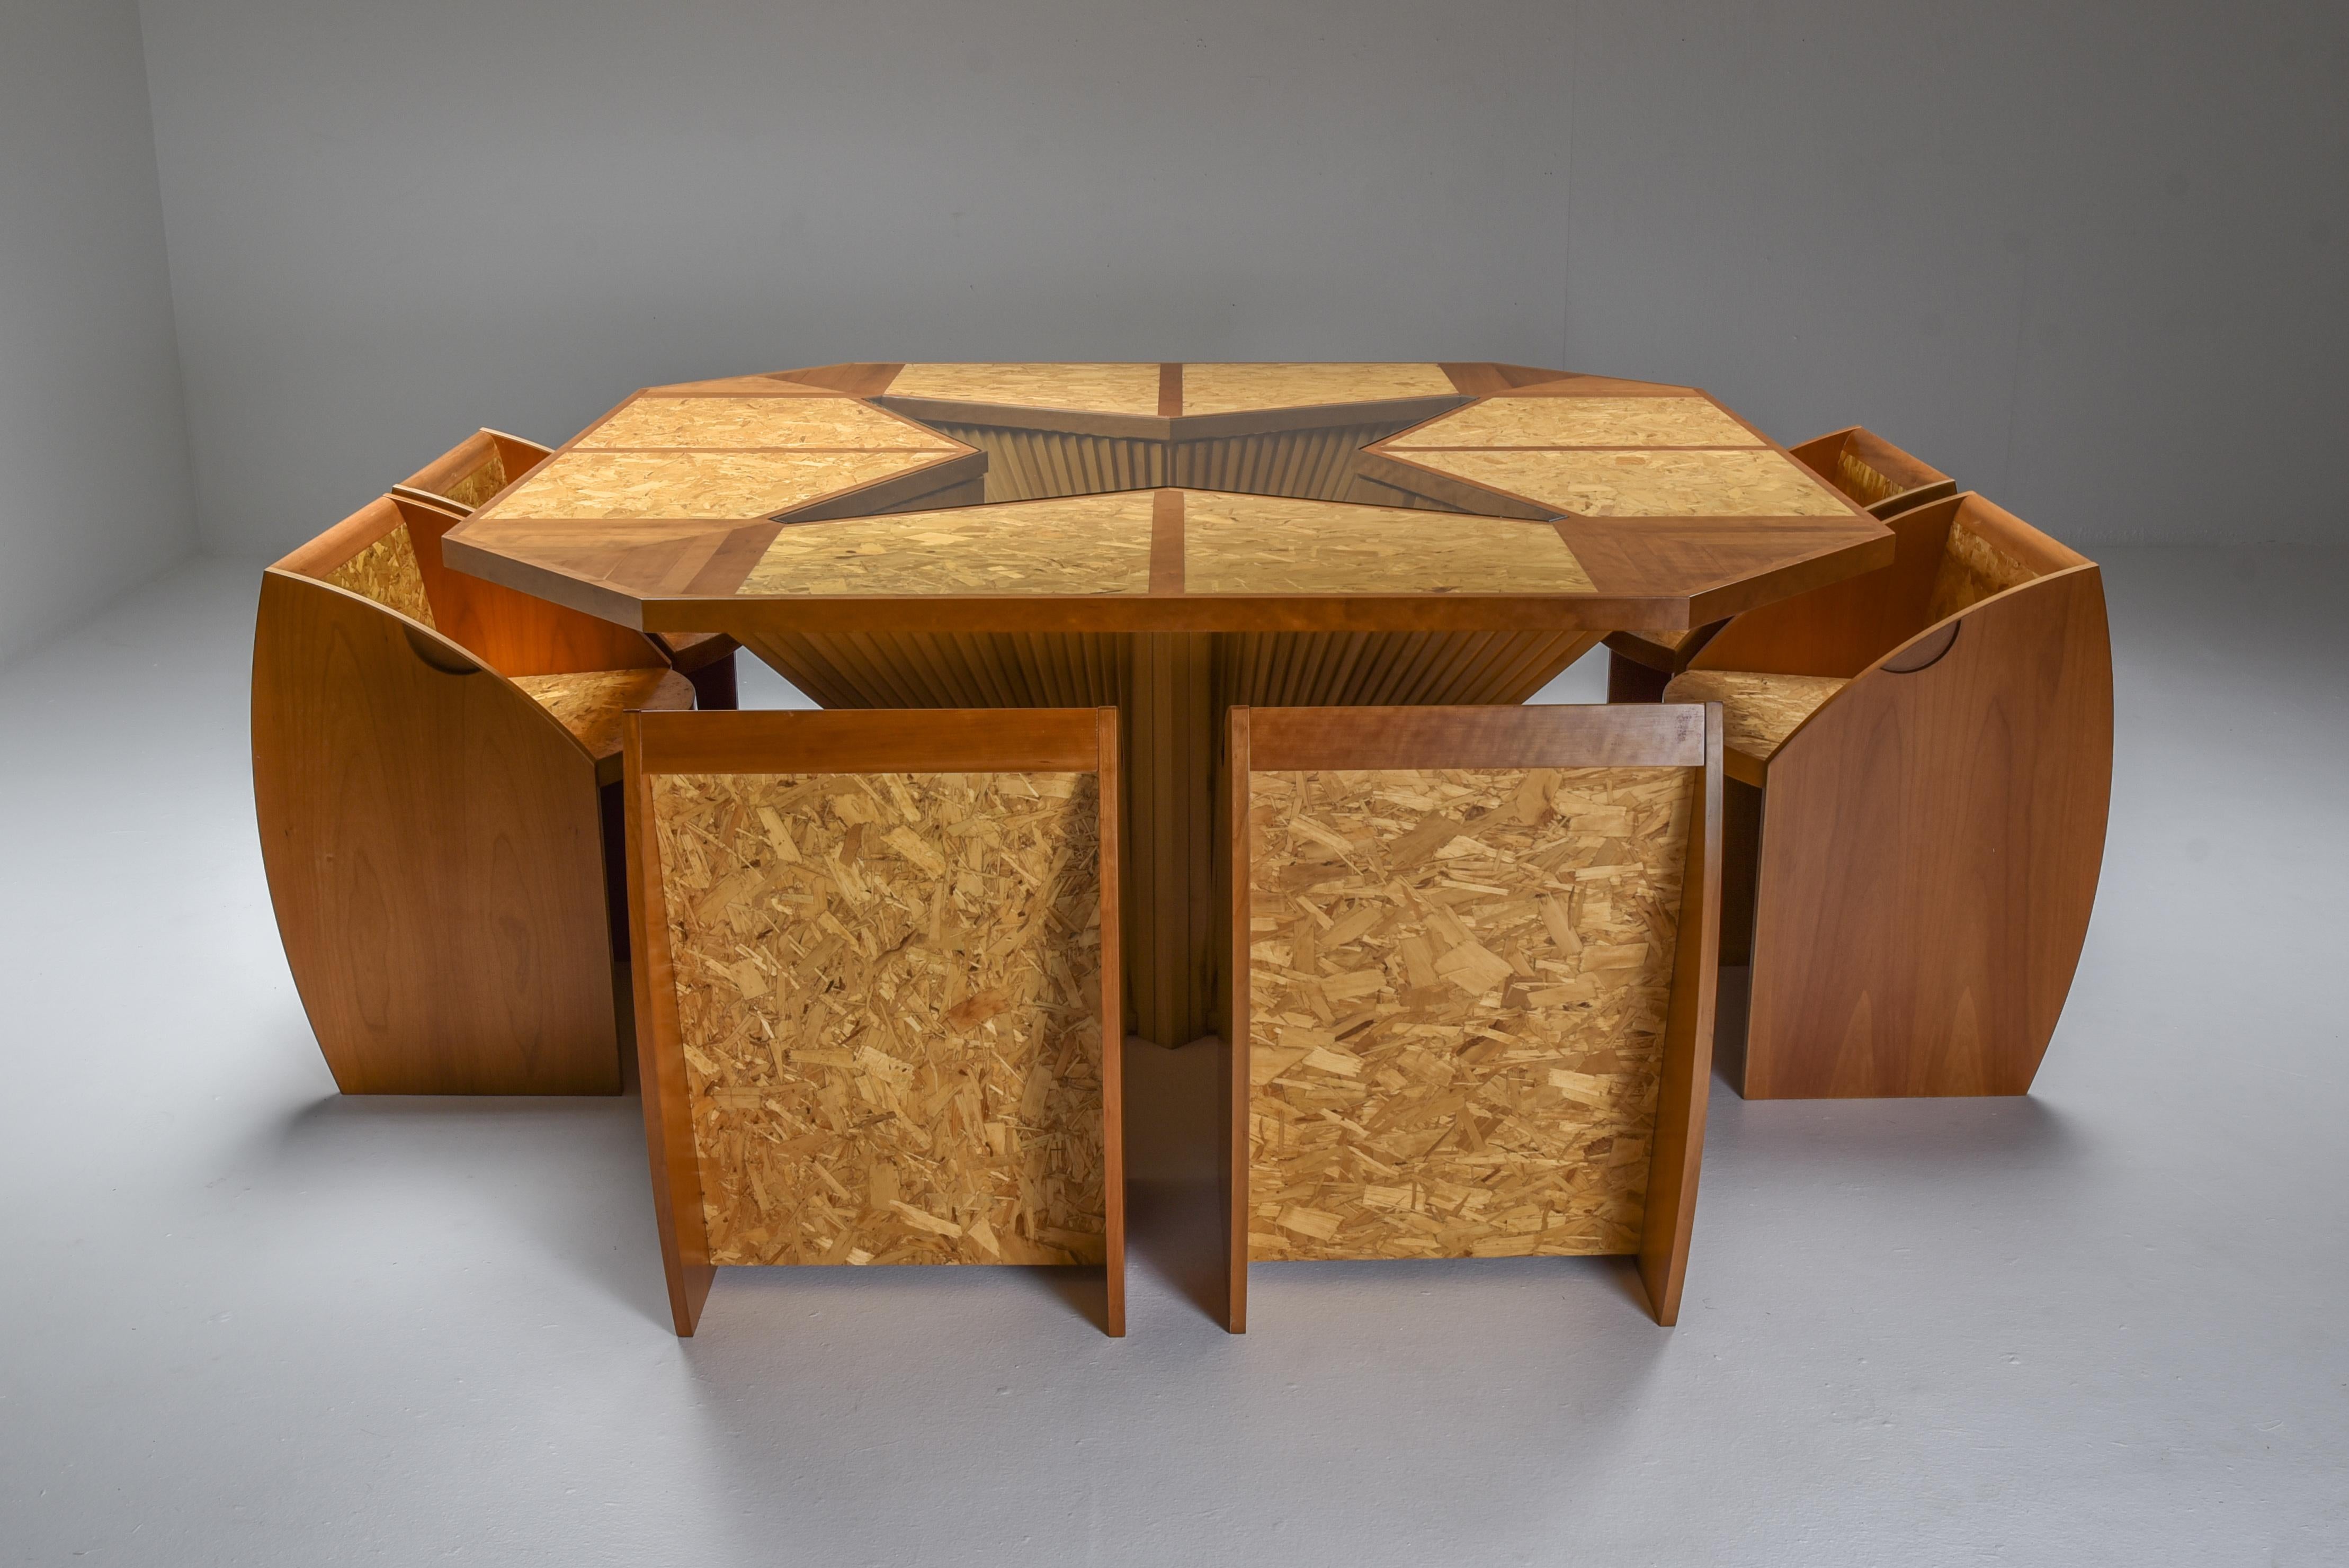 Mid-Century Modern; Hollywood Regency; Dining Room Set; Dining Area; Dining Chairs; Dining Table; Italian Design; 1970s, Vivai del Sud Inspired; Wood; Glass; Geometric Shape; 1950s;

This custom one-of-a-kind dining room set is characterised by